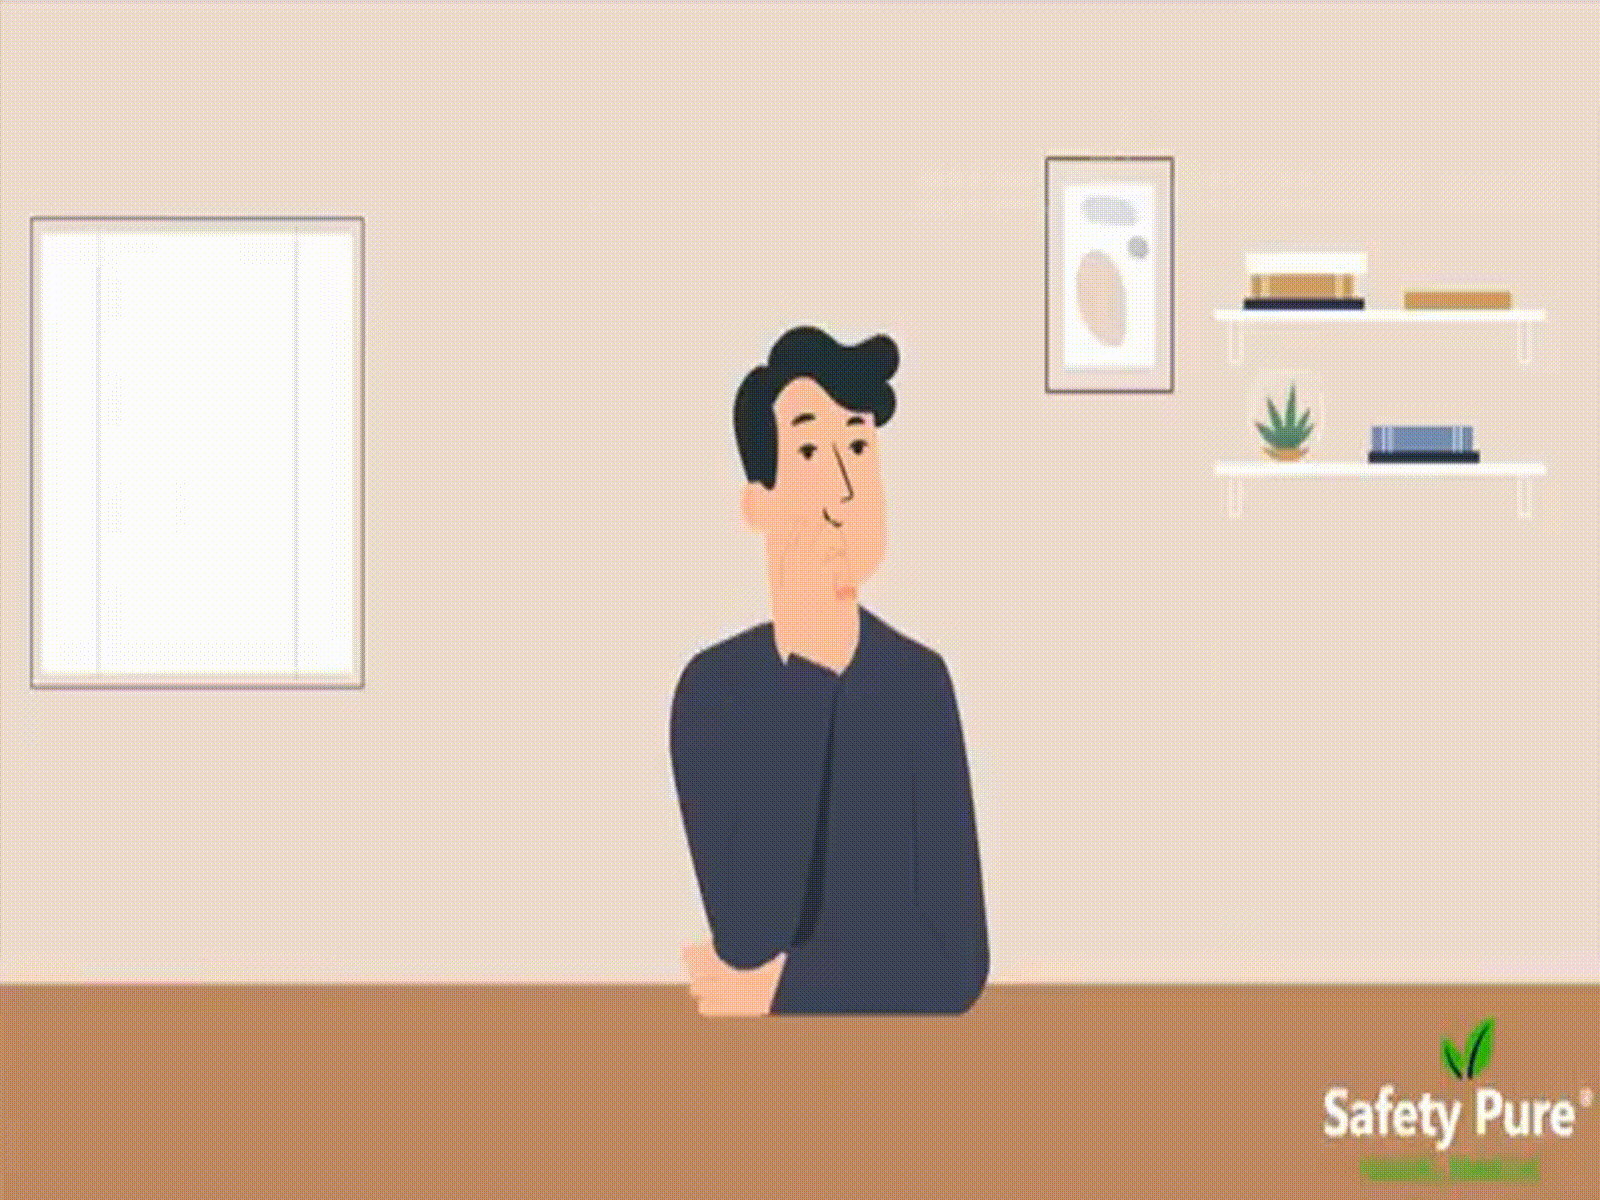 Top 5 Animation Explainer Video Production Companies in Kamloops 2d animation 3d animation animation video animationcompanyinbangalore animationcompanyinindia animationvideocompanyinbangalore animationvideomakerinbangalore explainer video explainervideocompany explainervideocompanyinbangalore explainervideocompanyinchennai illustration village talkies whiteboard animation